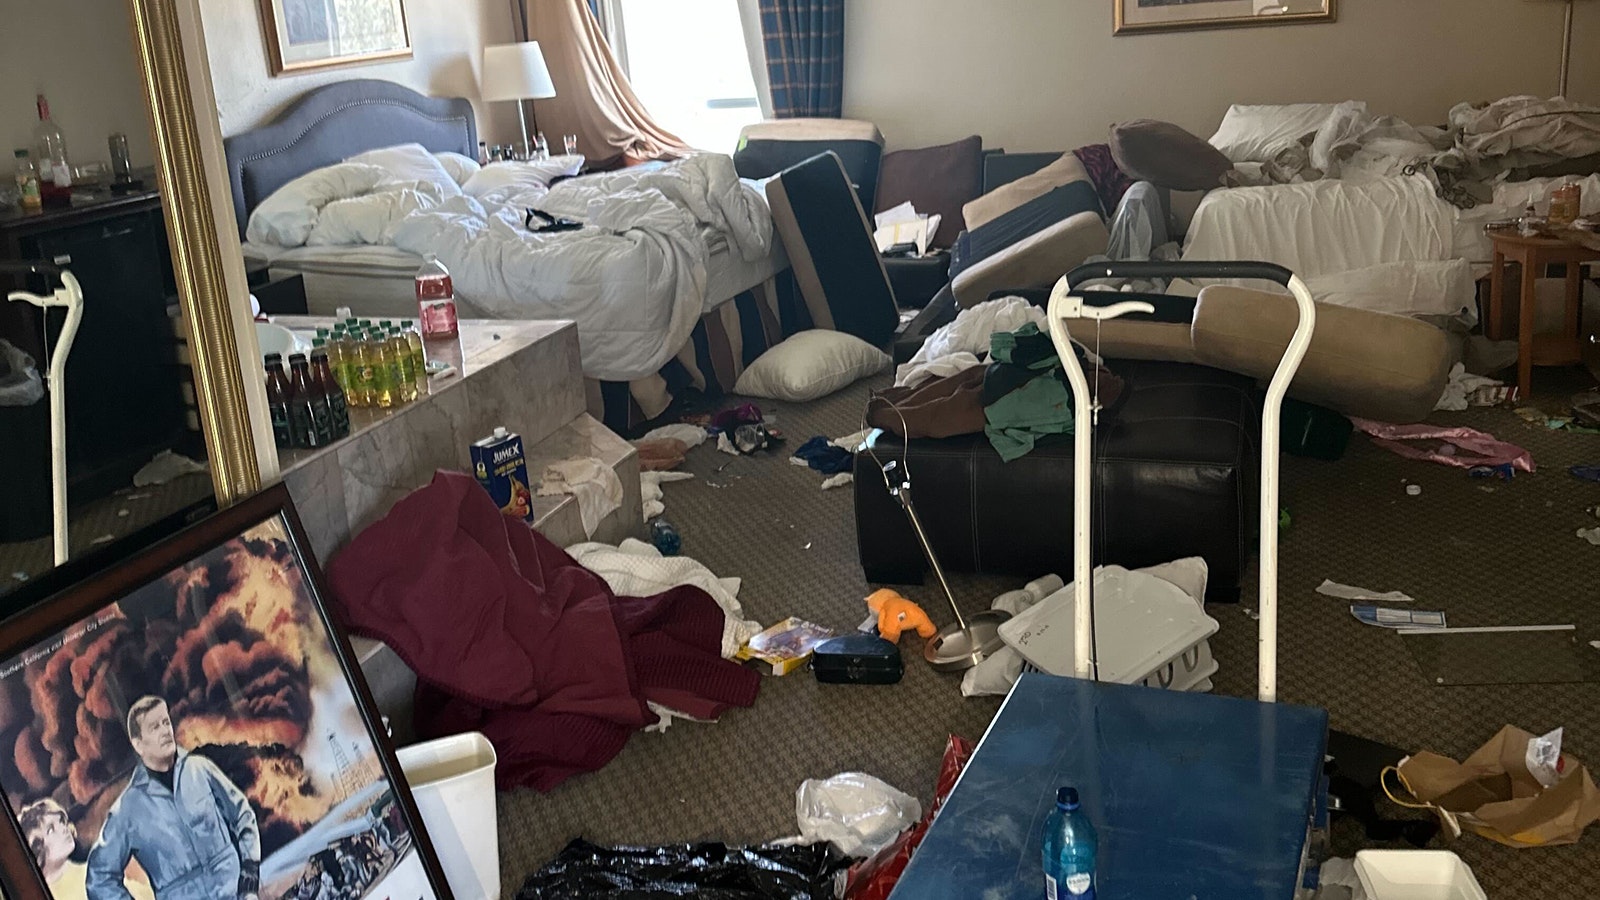 One of the trashed rooms at the Casper Econo Lodge motel.